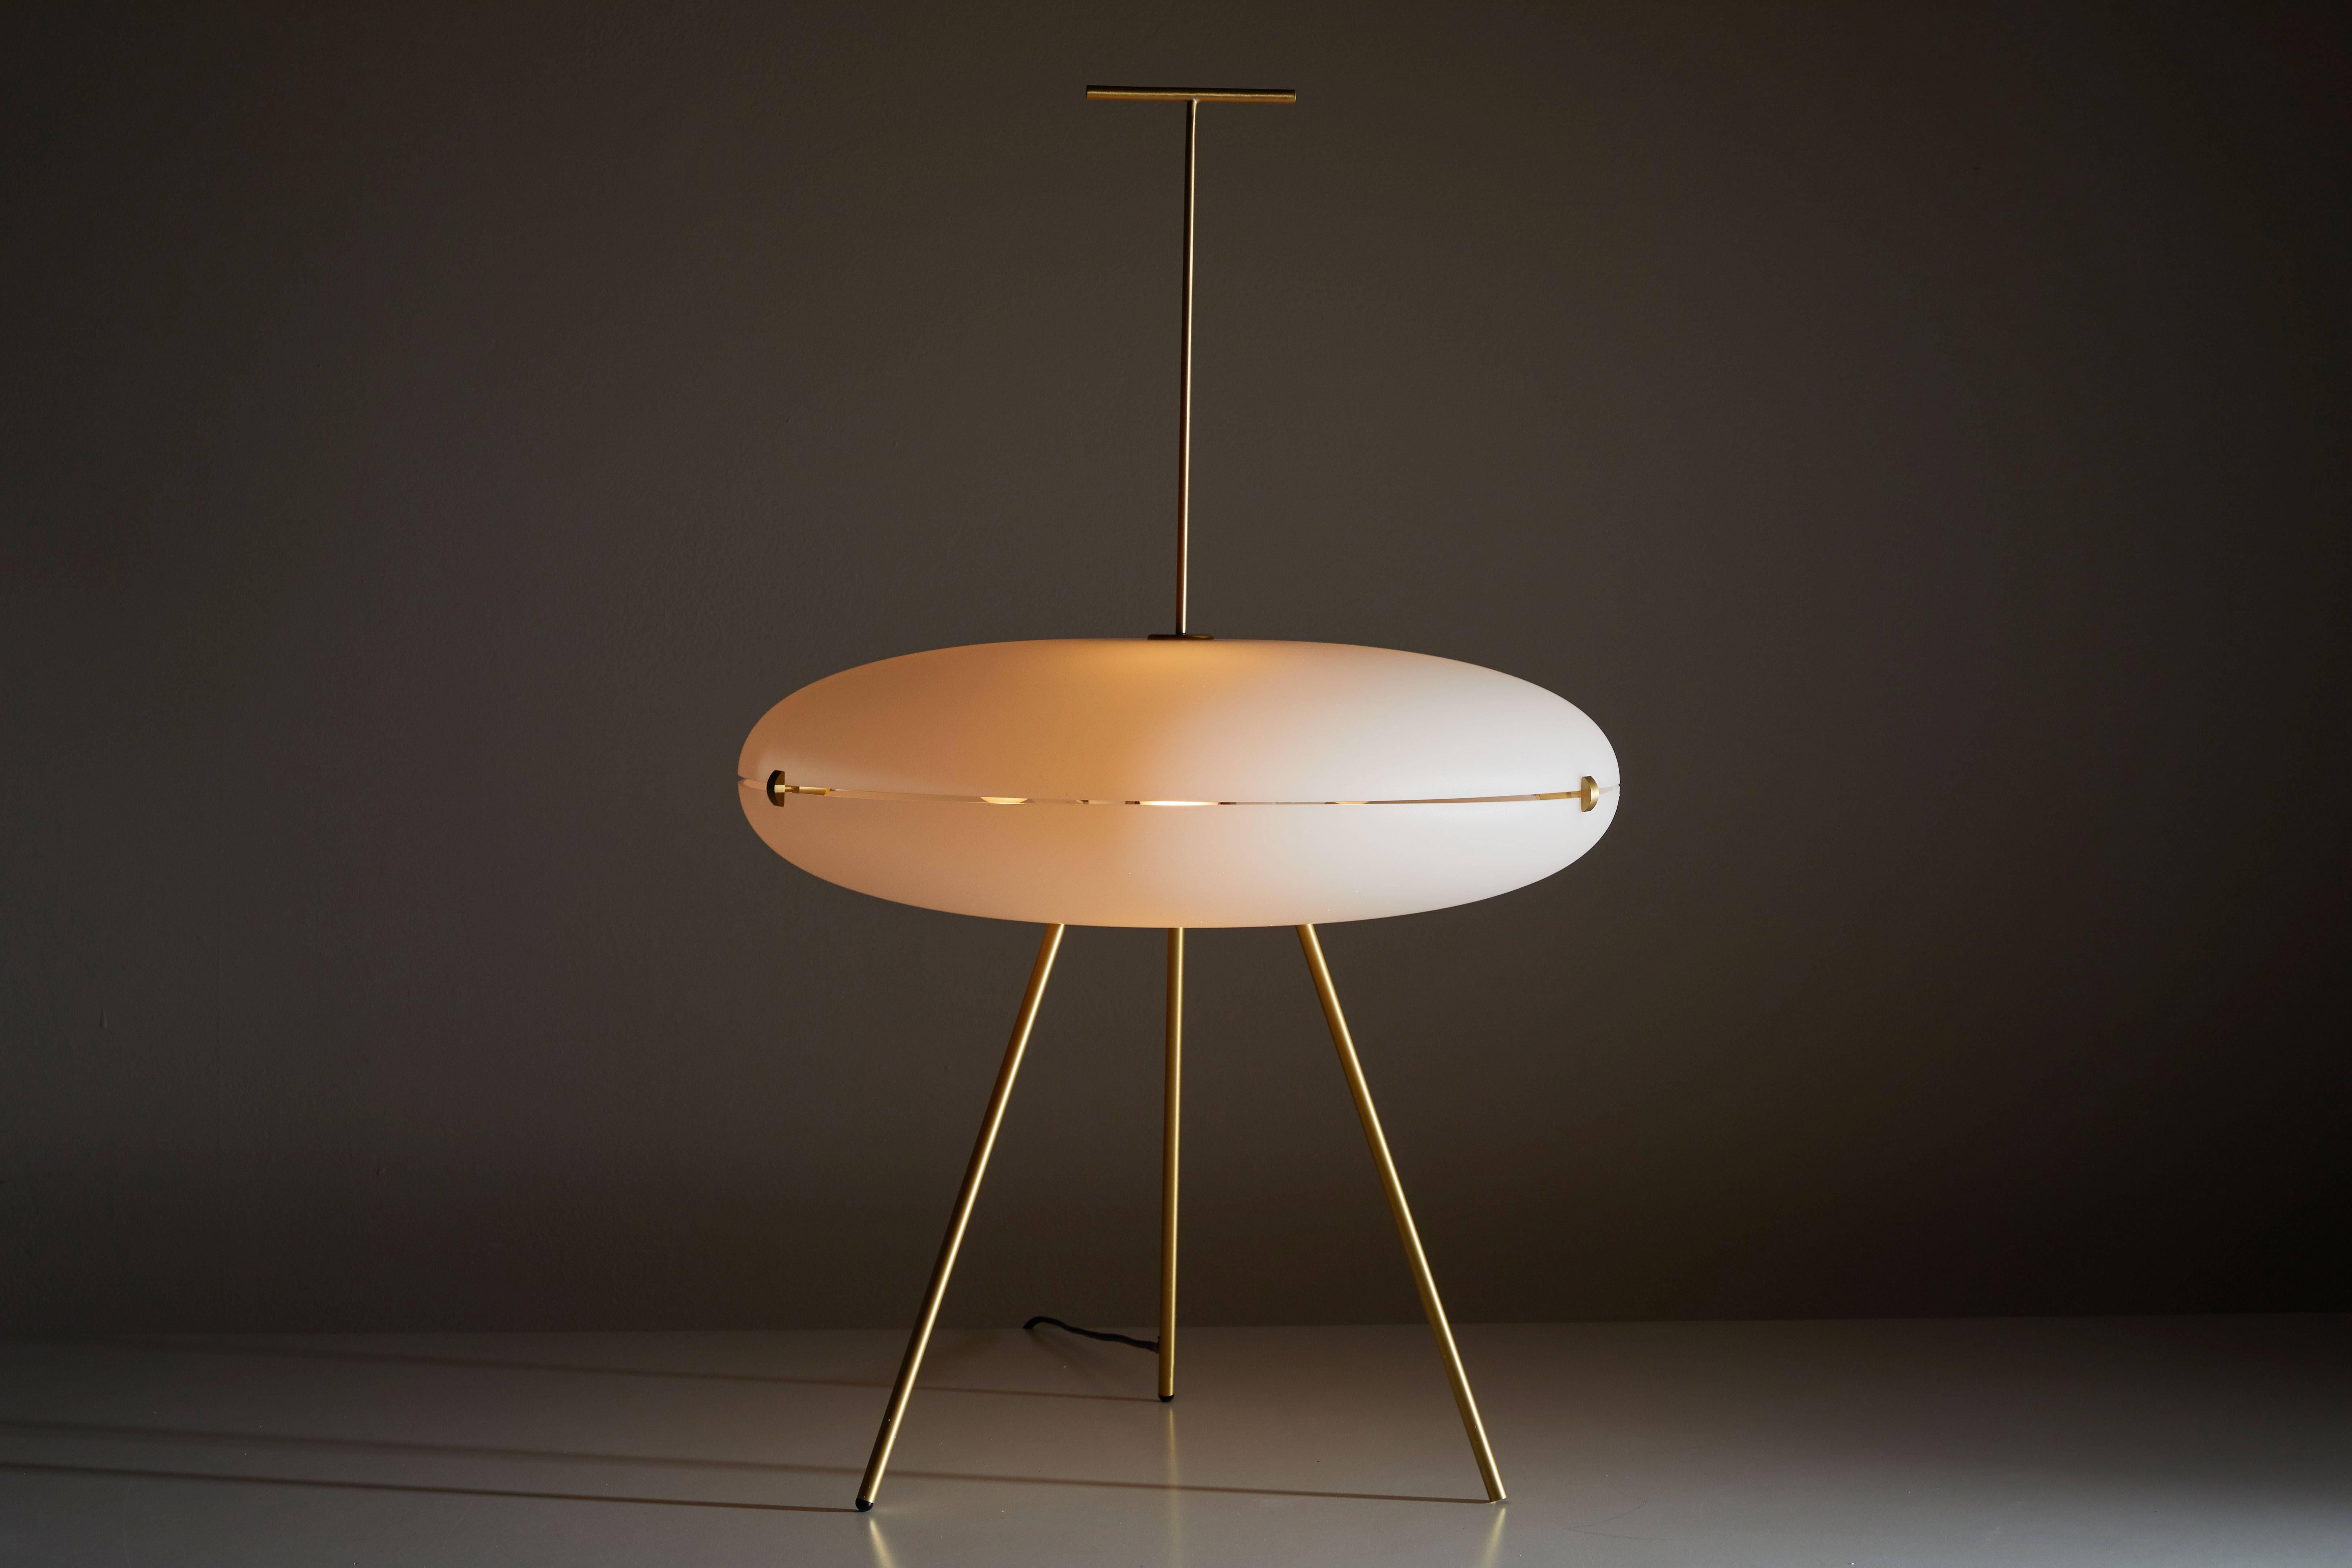 Luna Orizzontale floor lamp by Gio Ponti . Currently produced by Tato Italia. This lamp was built based on an unrealized prototype designed by Gio Ponti and originally intended for the Triennale in Milan in 1957. Brushed brass hardware with acrylic